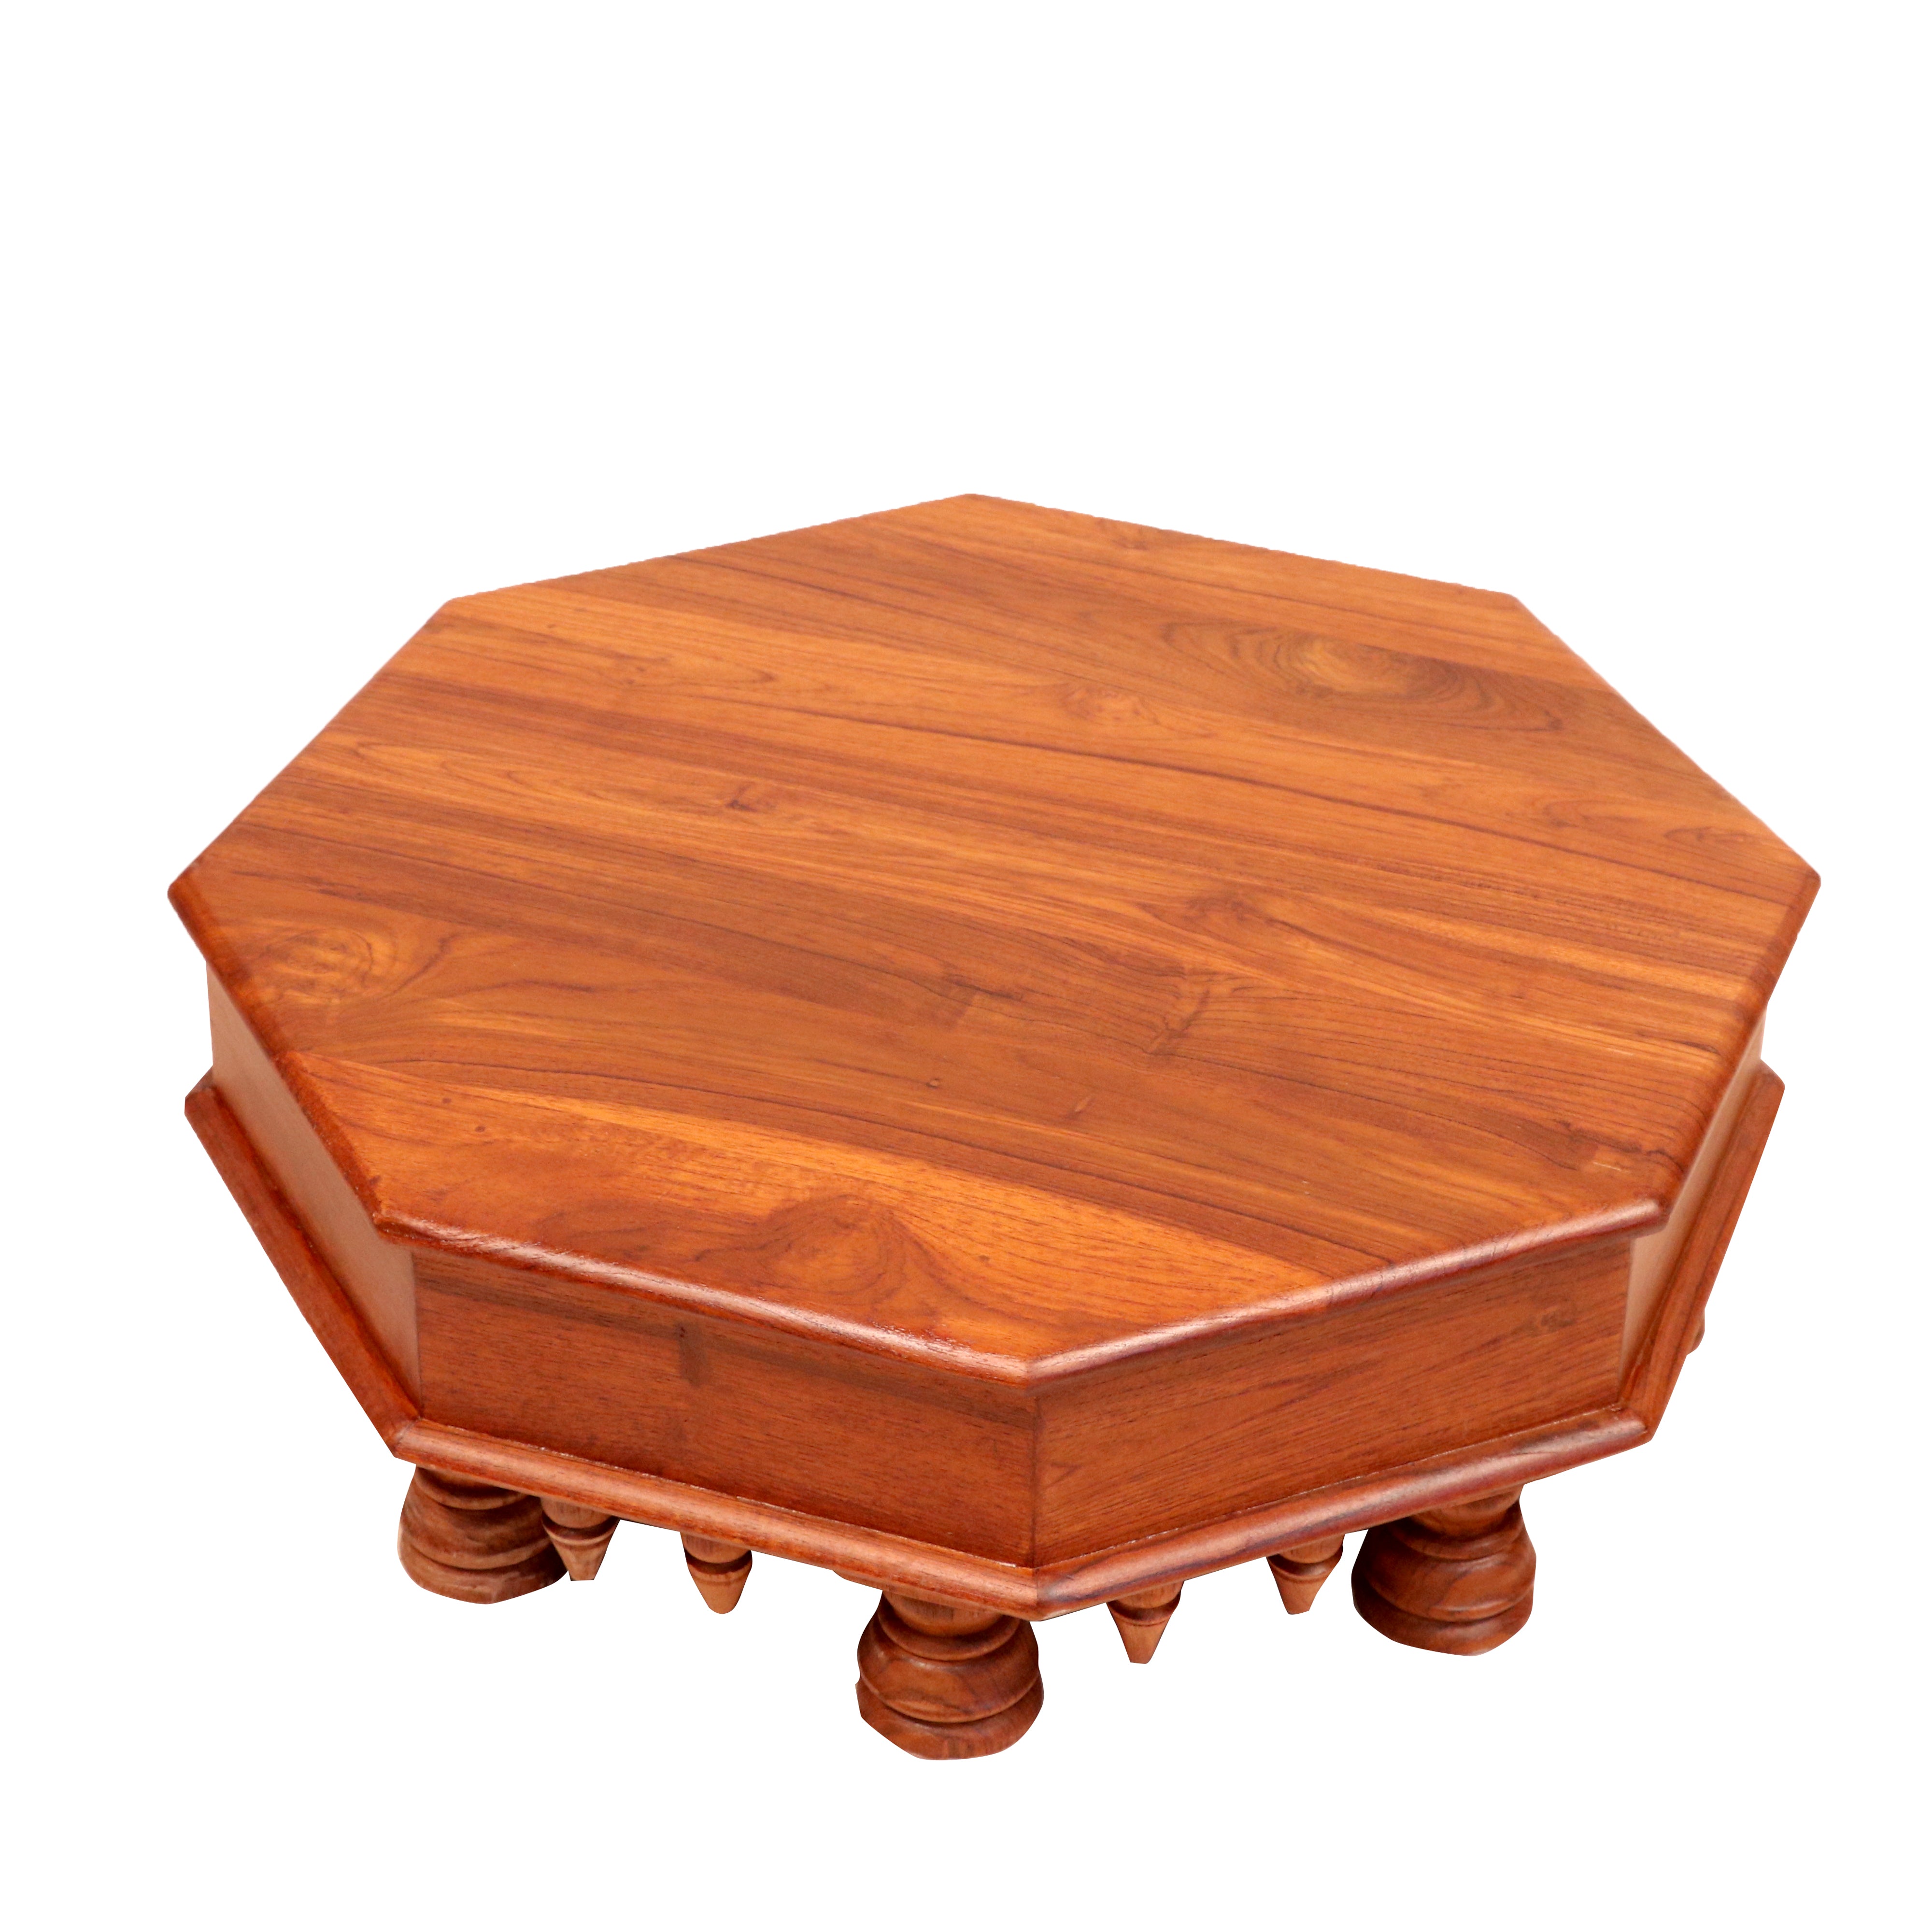 Old Diamond Shaped Handmade Natural Classic Wooden Bajot for Home Bajot